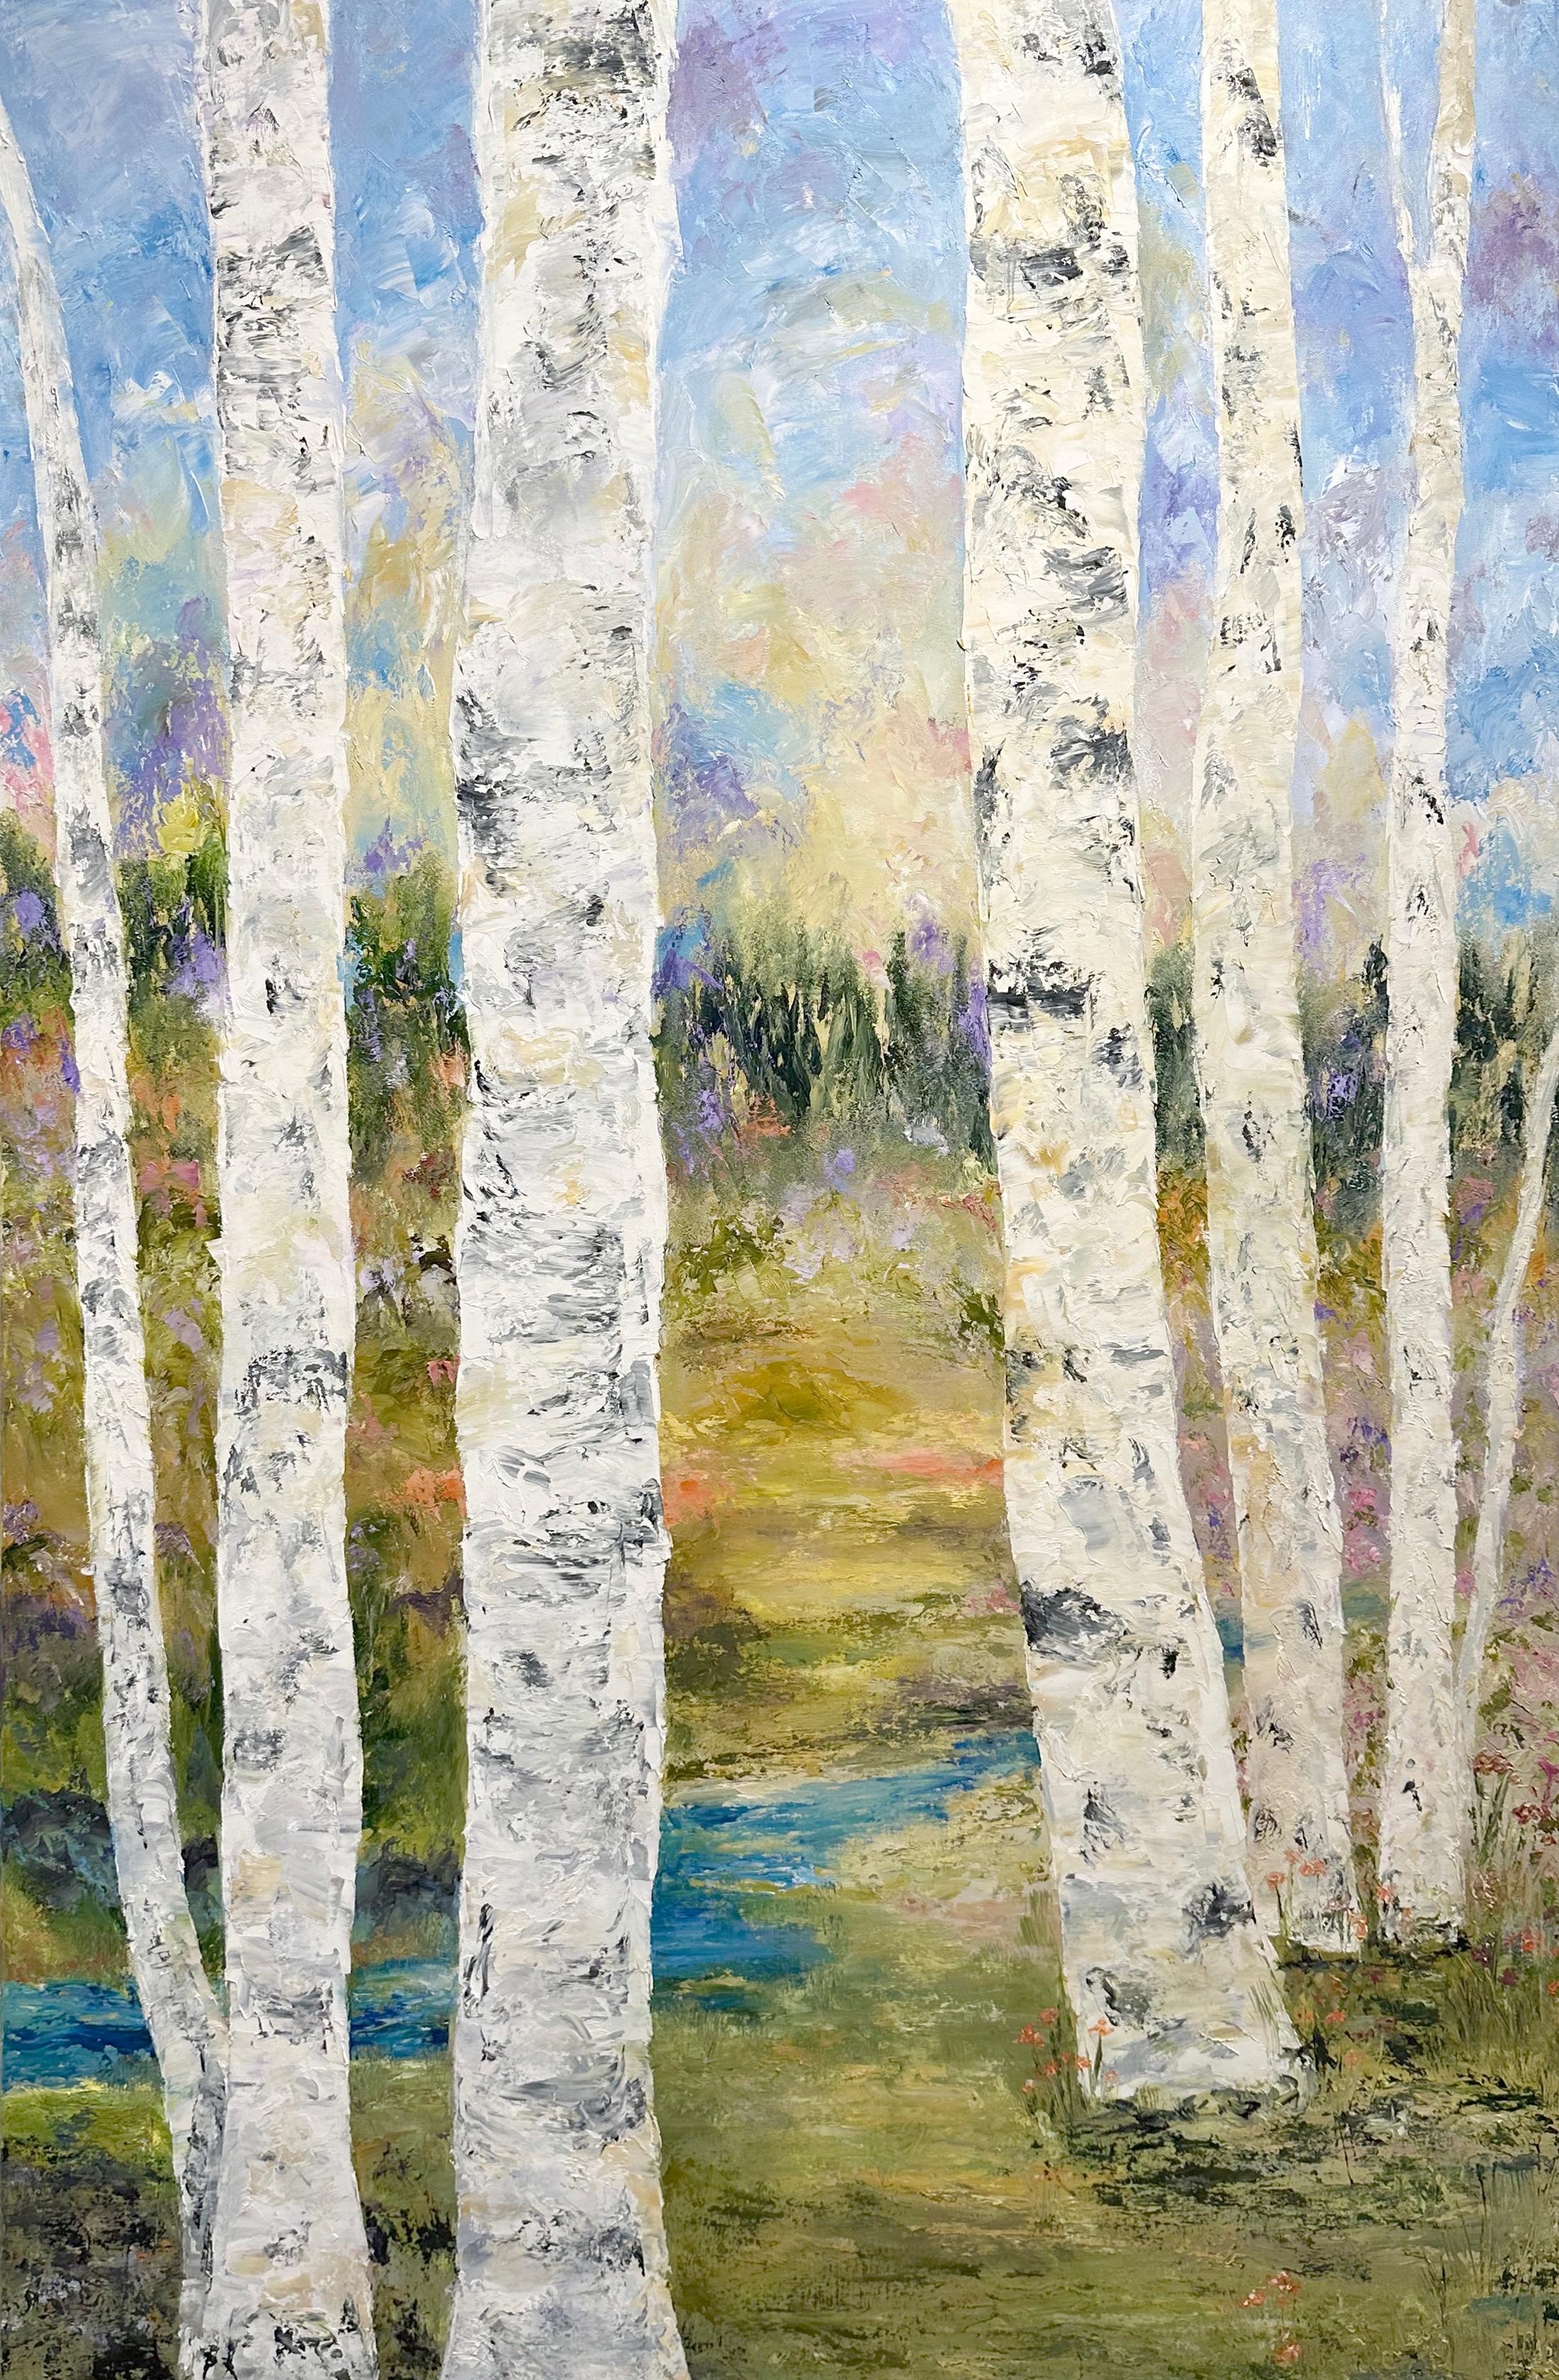 Gary Zack  Landscape Painting - Gary Zack, "Spring Birches", 48x30 Colorful Birch Tree Landscape Oil Painting